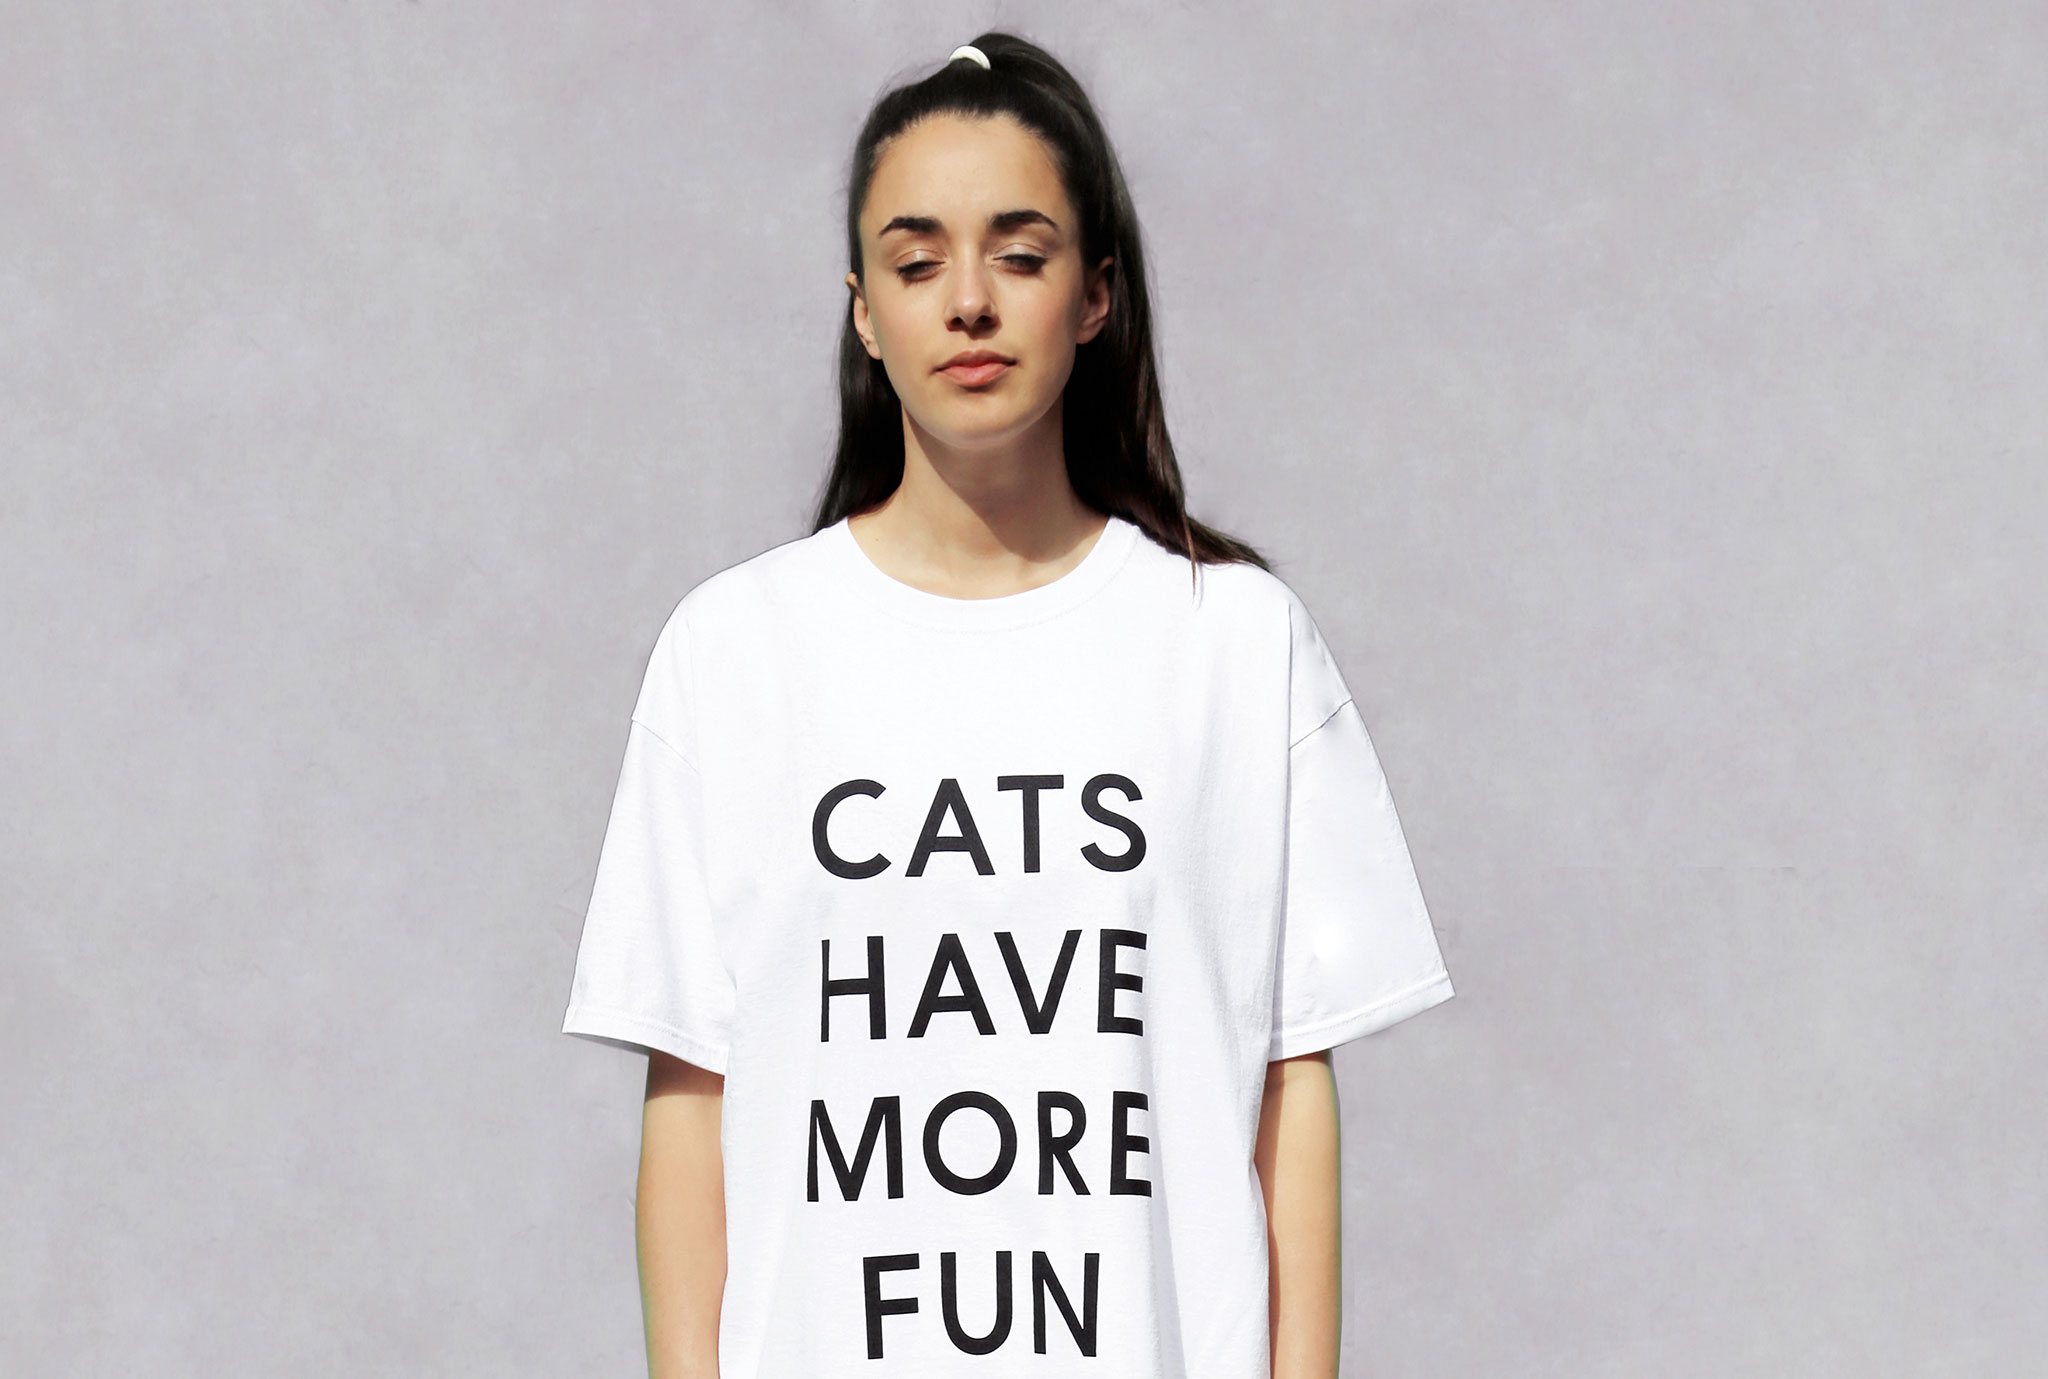 Cats have more fun queertype t-shirts